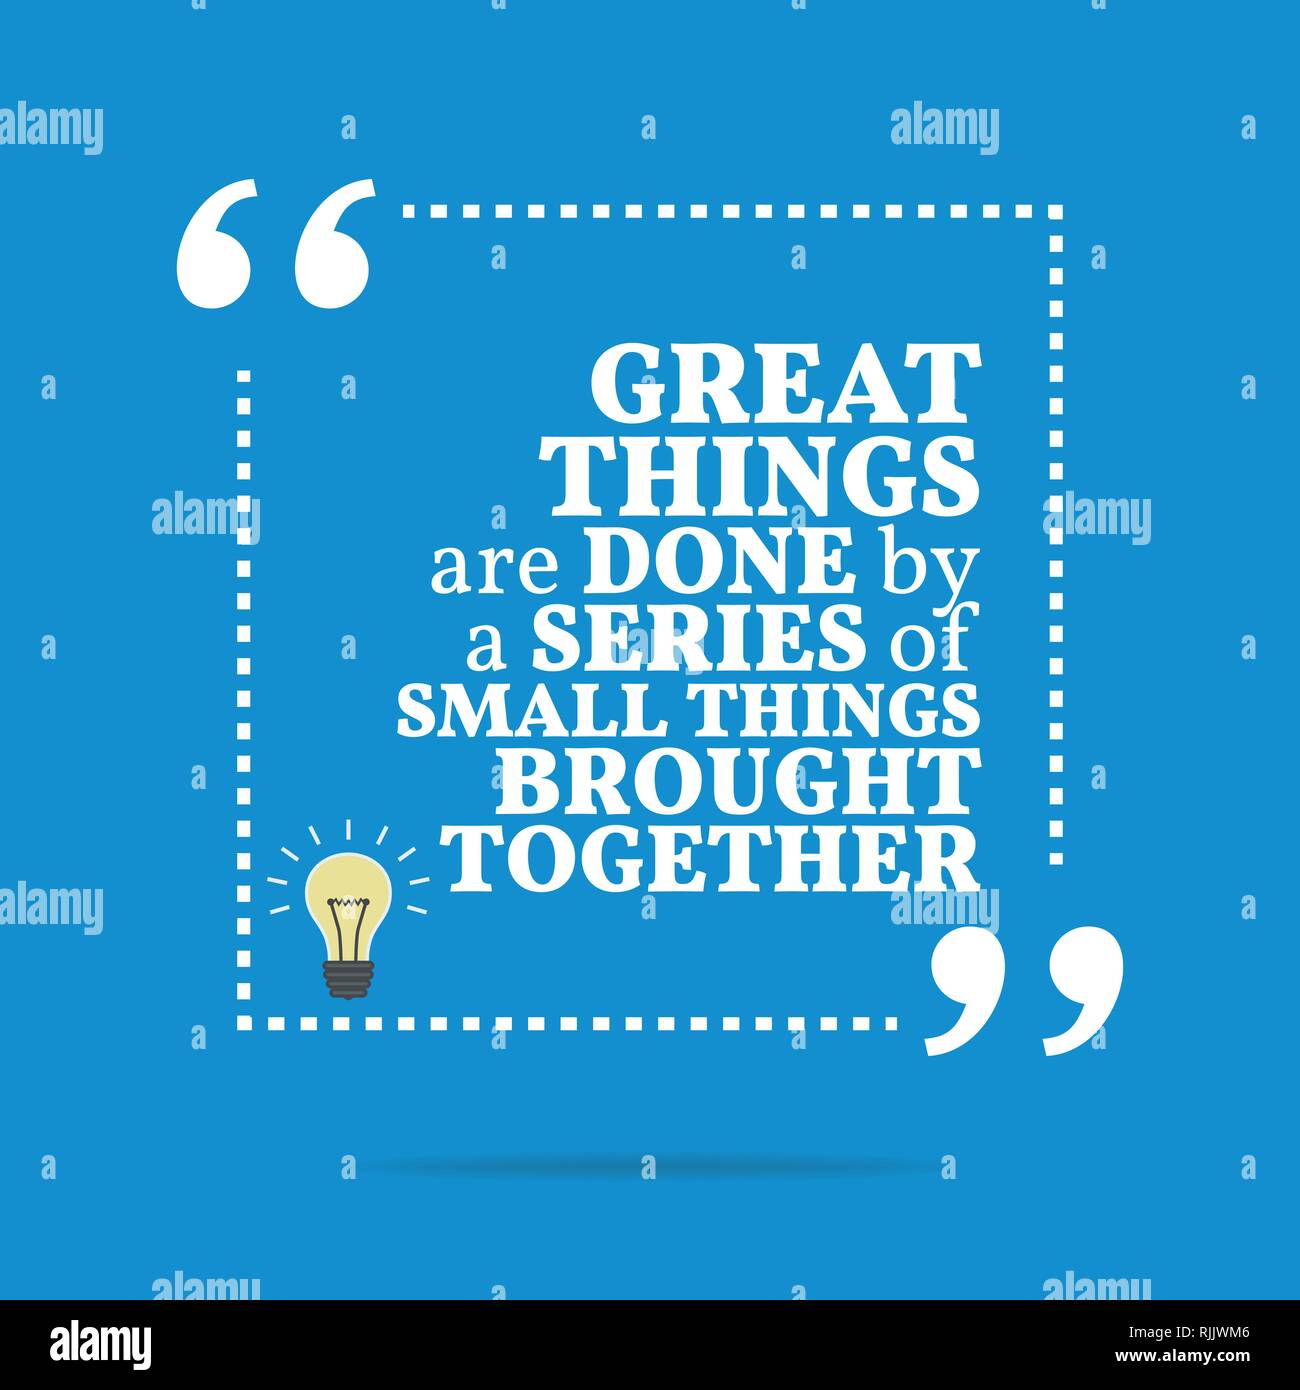 Inspirational motivational quote. Great things are done by a series of small things brought together. Simple trendy design. Stock Vector